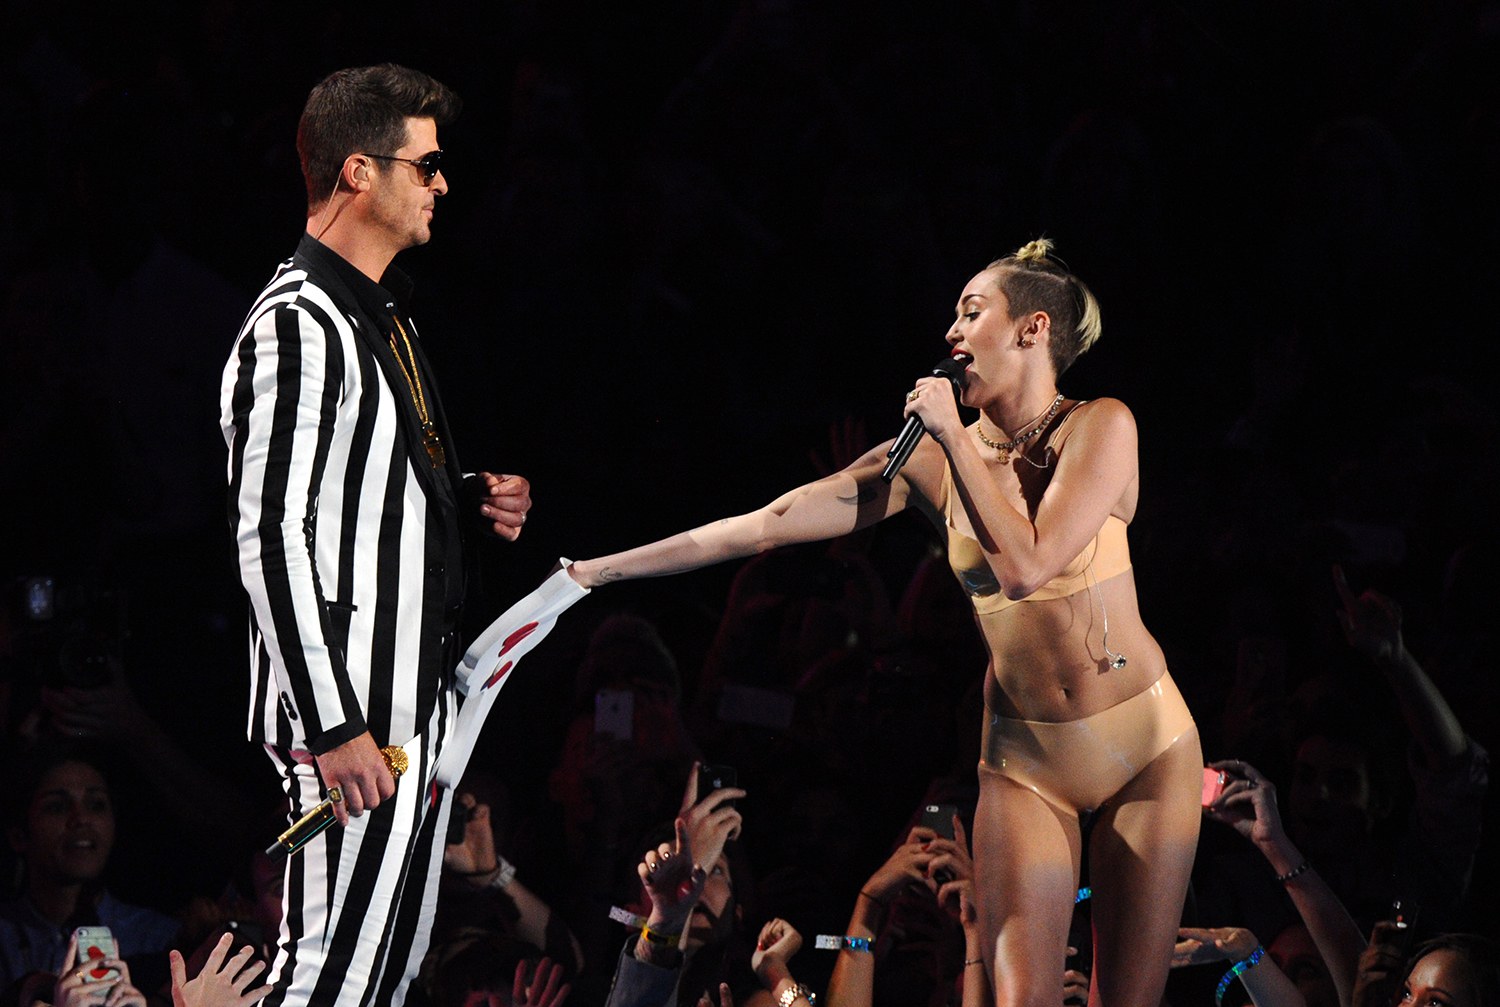 Xxx Siliping Ref Video - Miley Cyrus gets embarrassingly raunchy at the VMAs